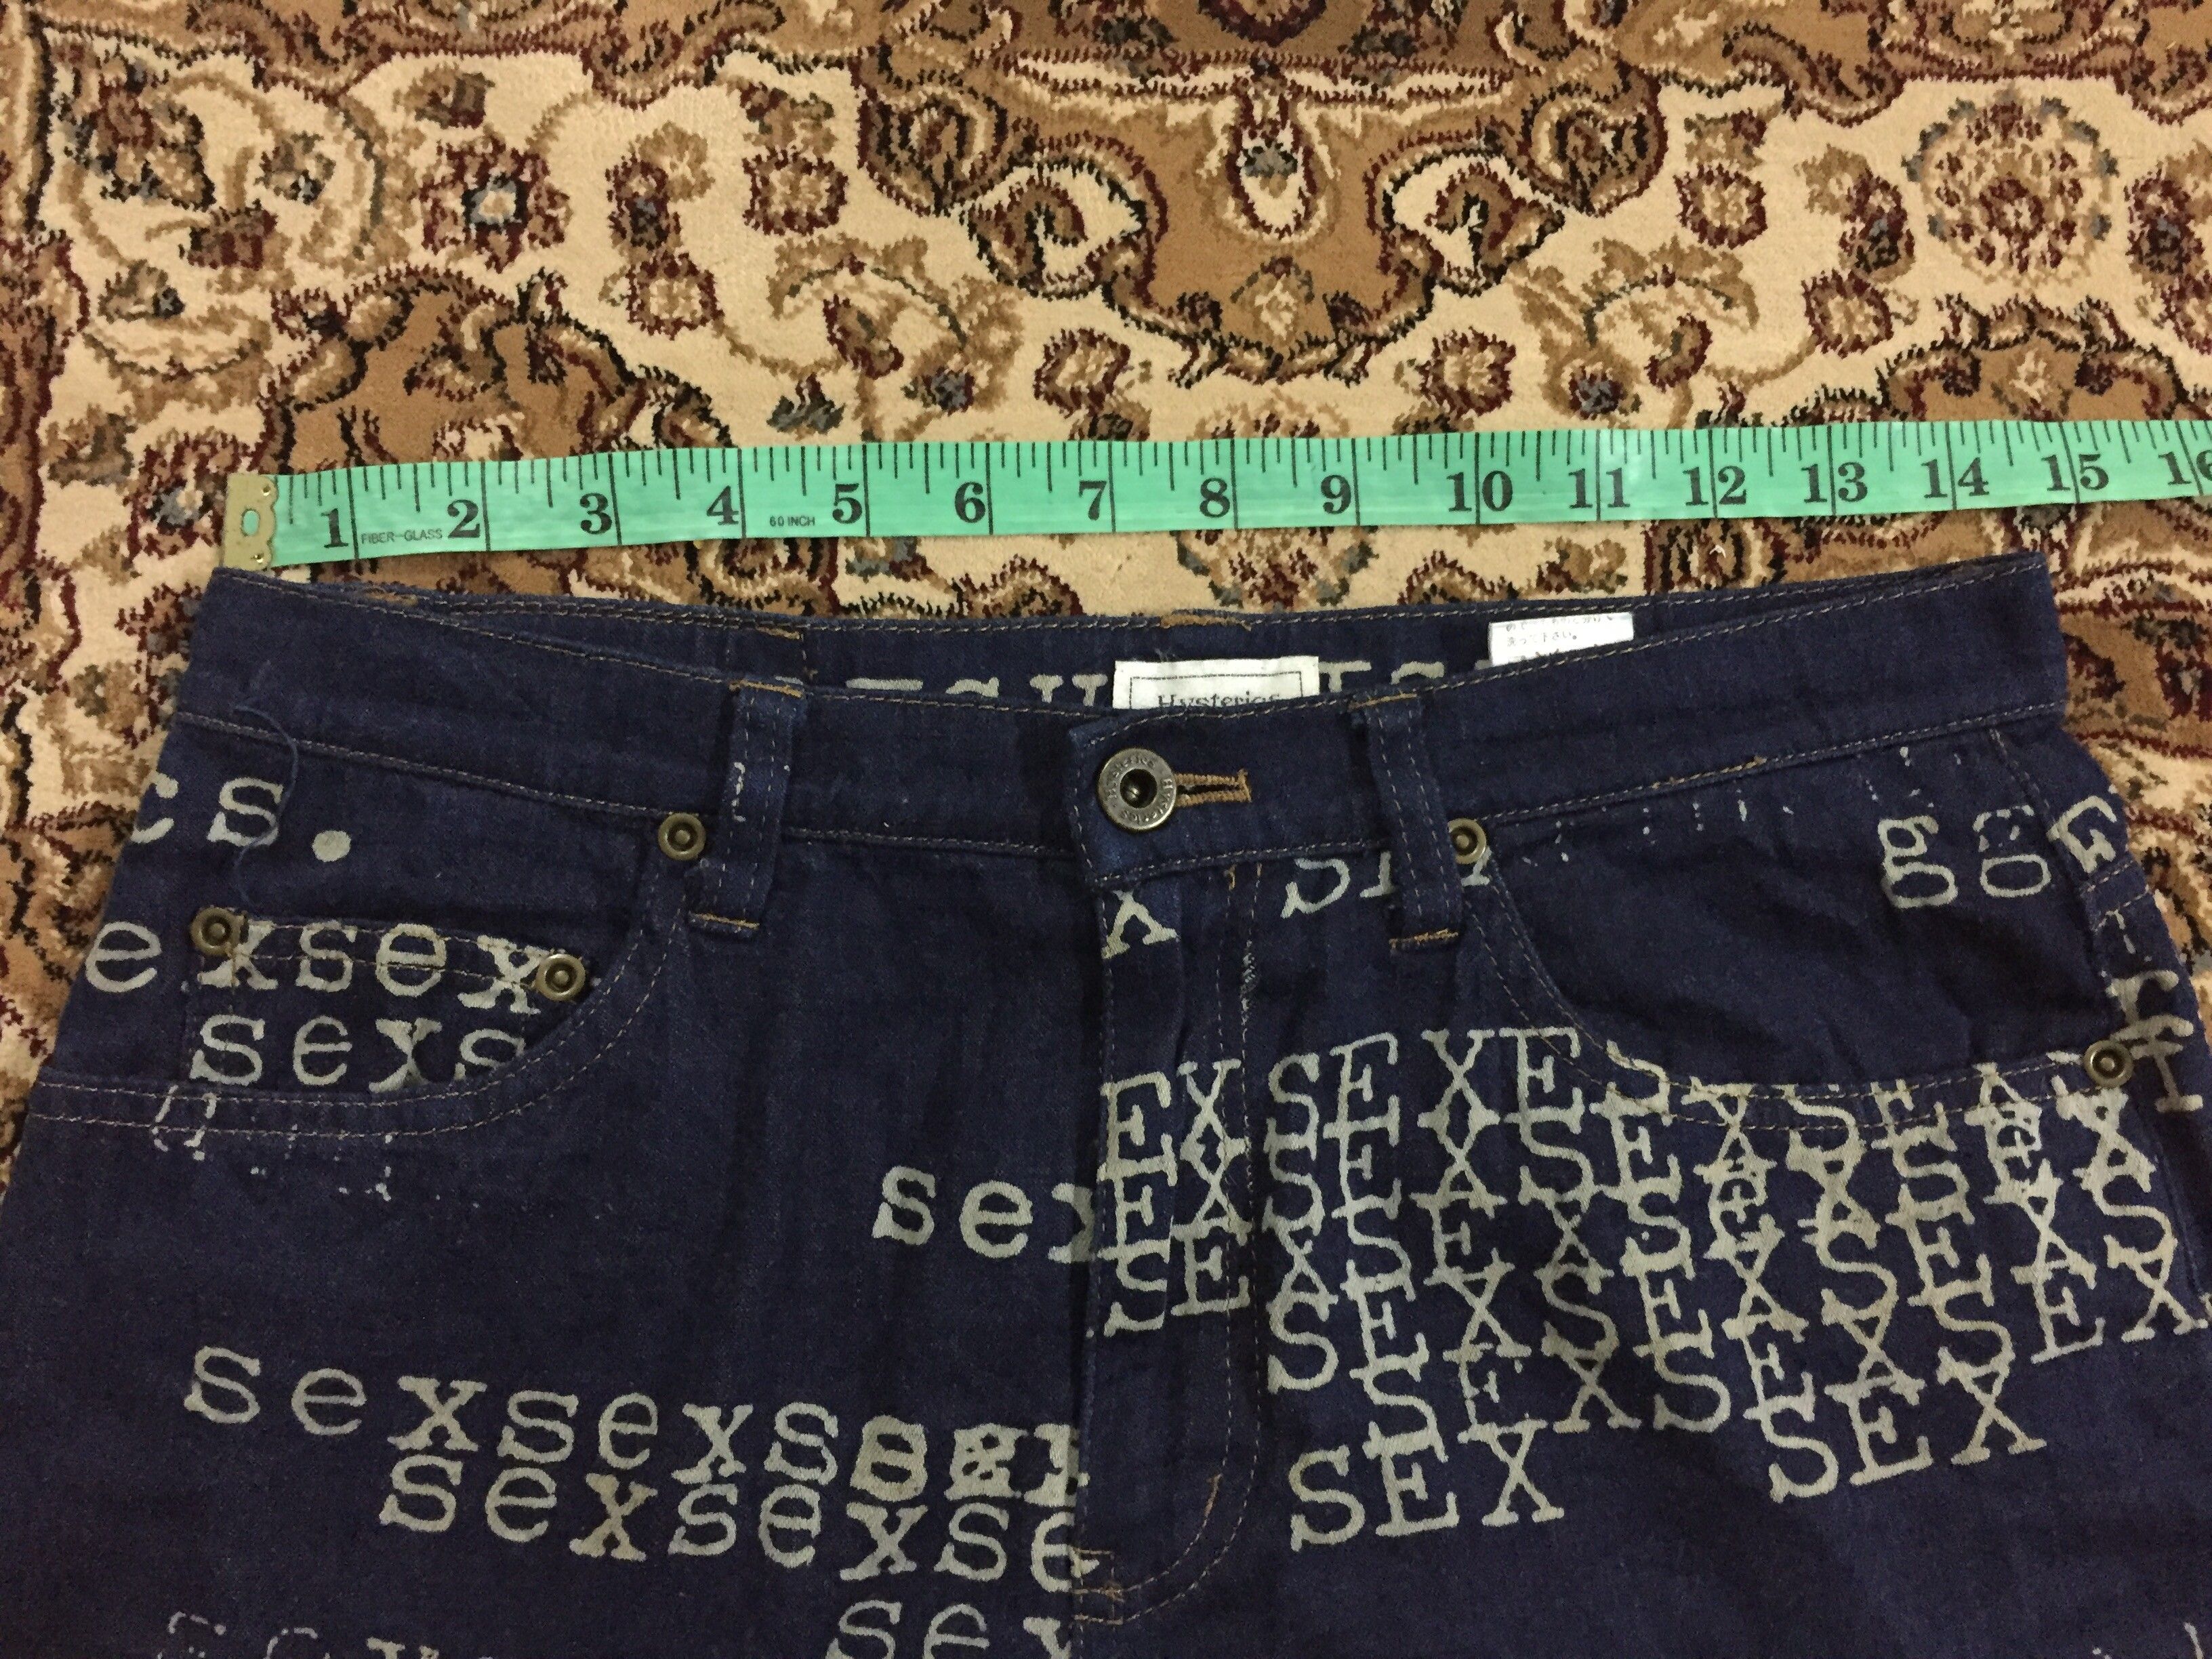 Hysteric Glamour SS99 Fuck Sex Bitch Denim pants | Grailed